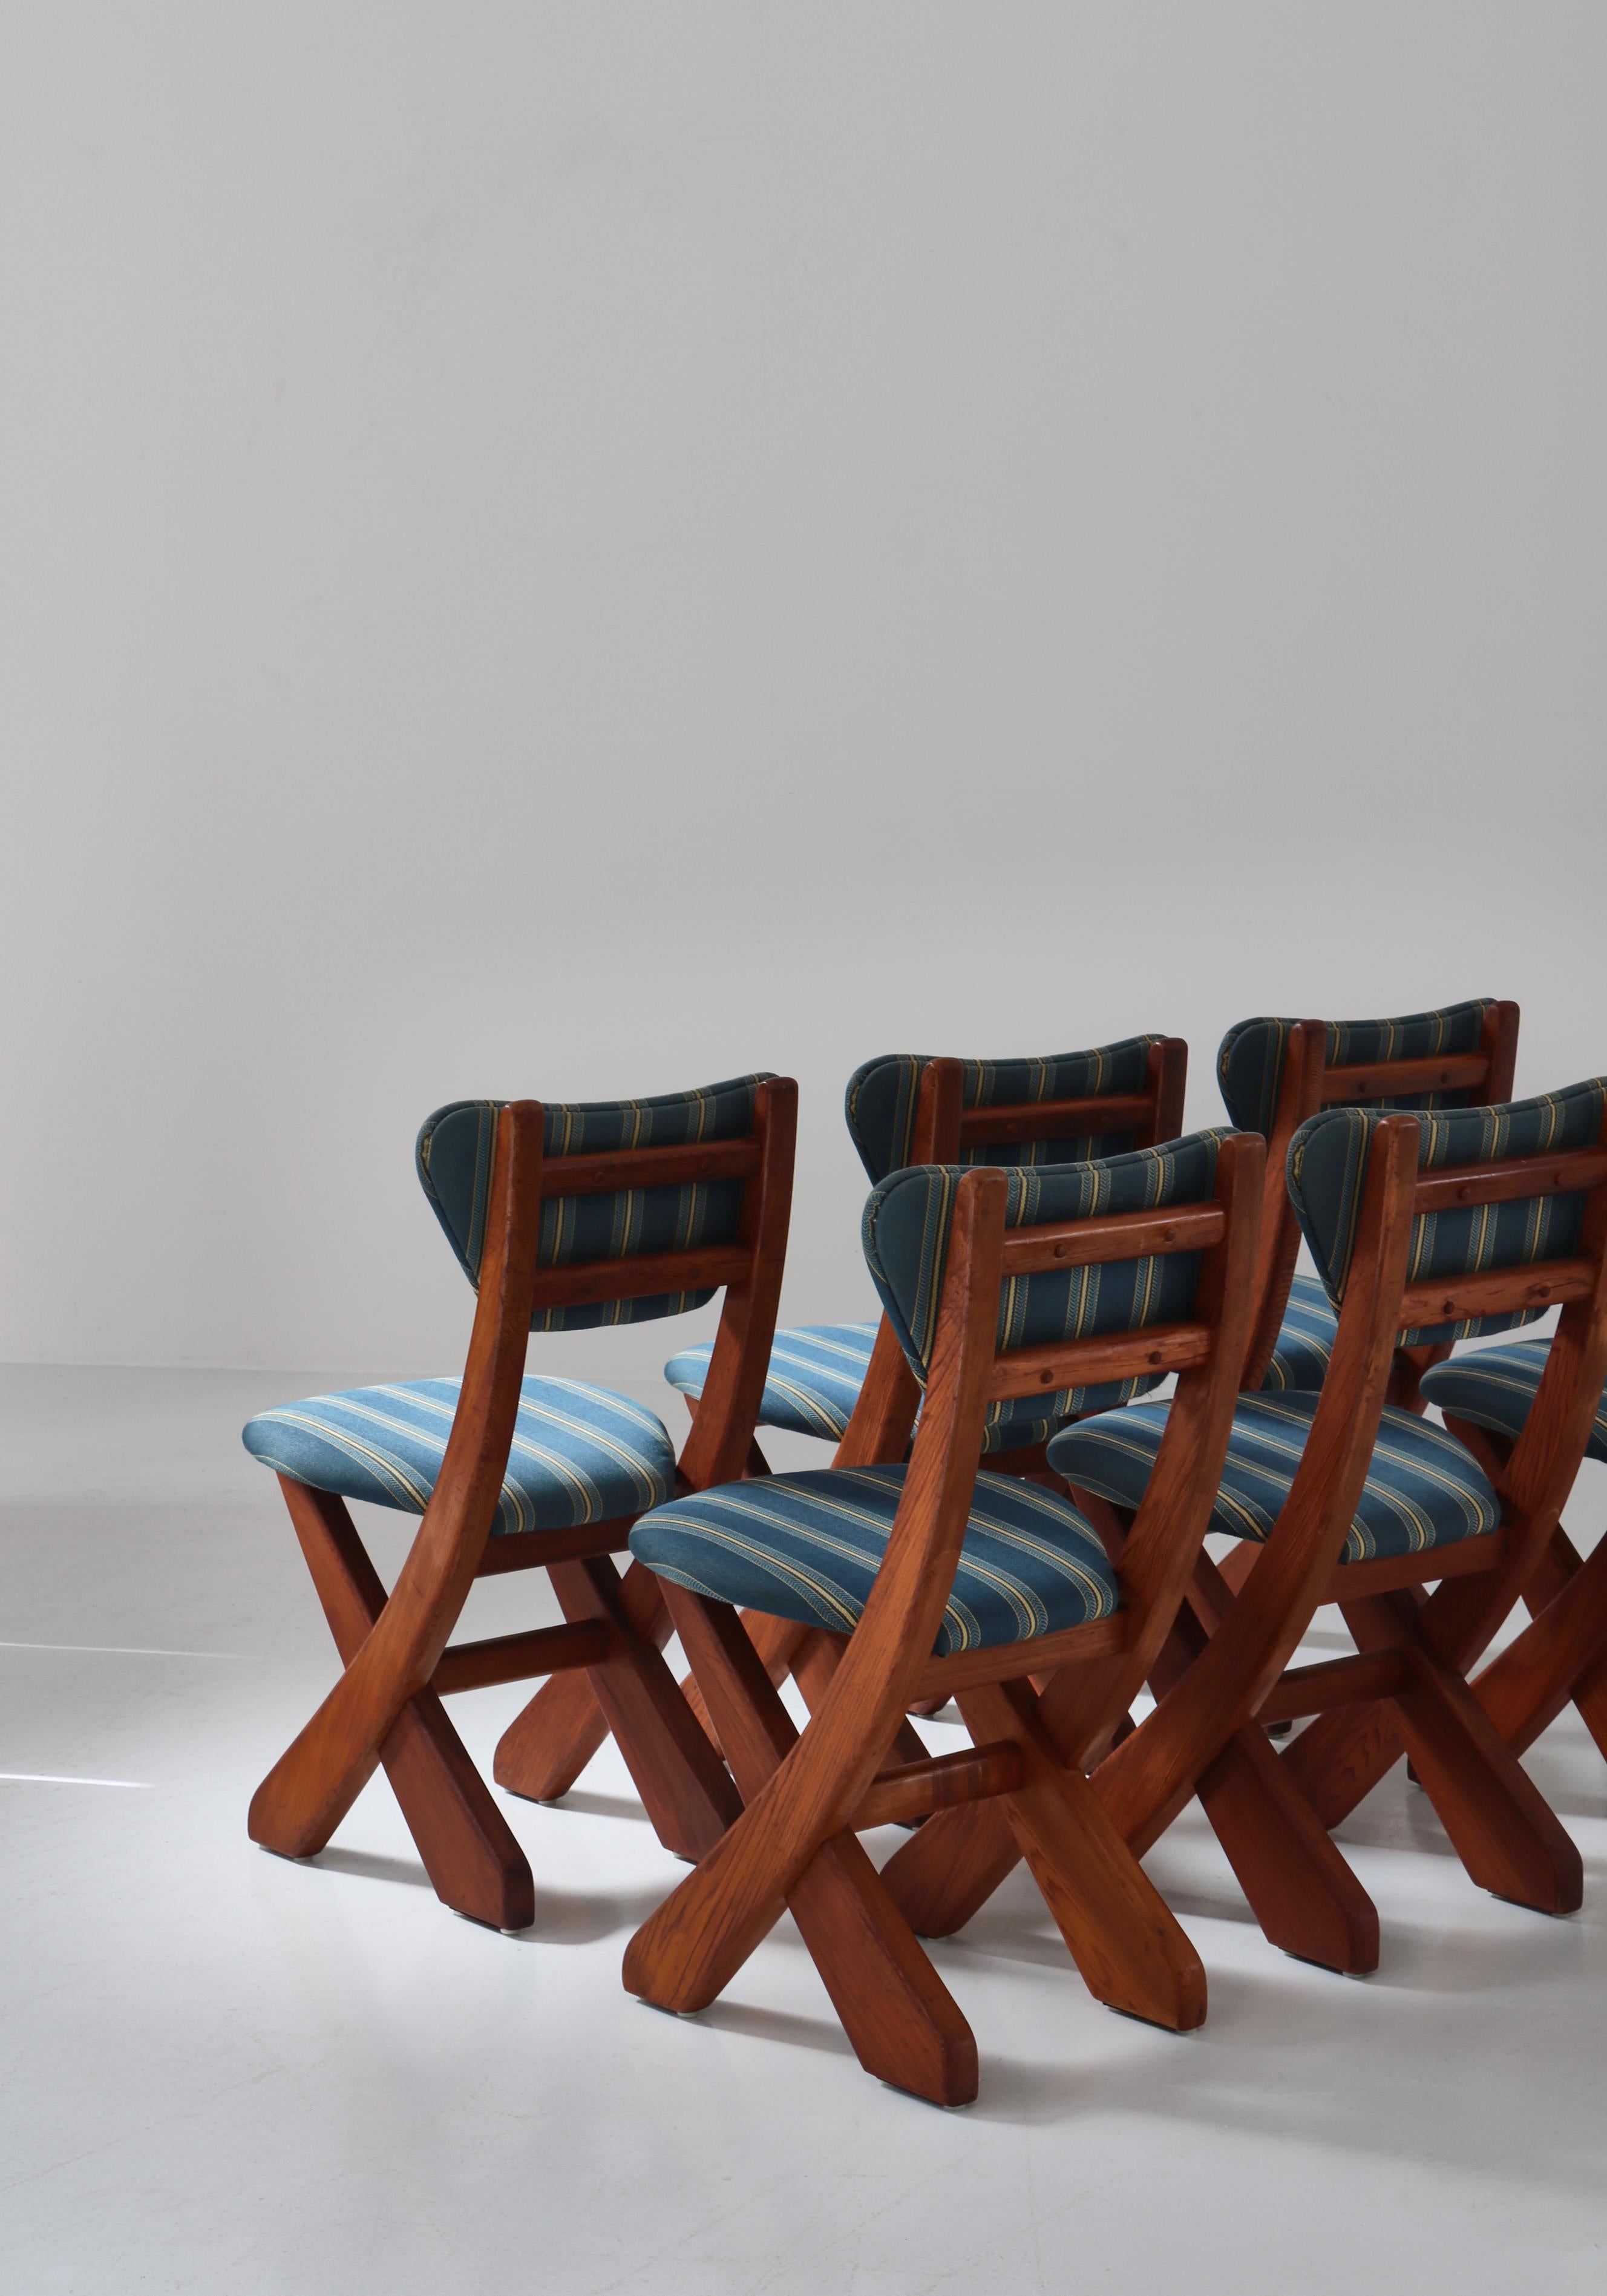 Mid-20th Century Set of 6 Scandinavian Modern Pinewood Dining Chairs, Denmark, 1960s For Sale